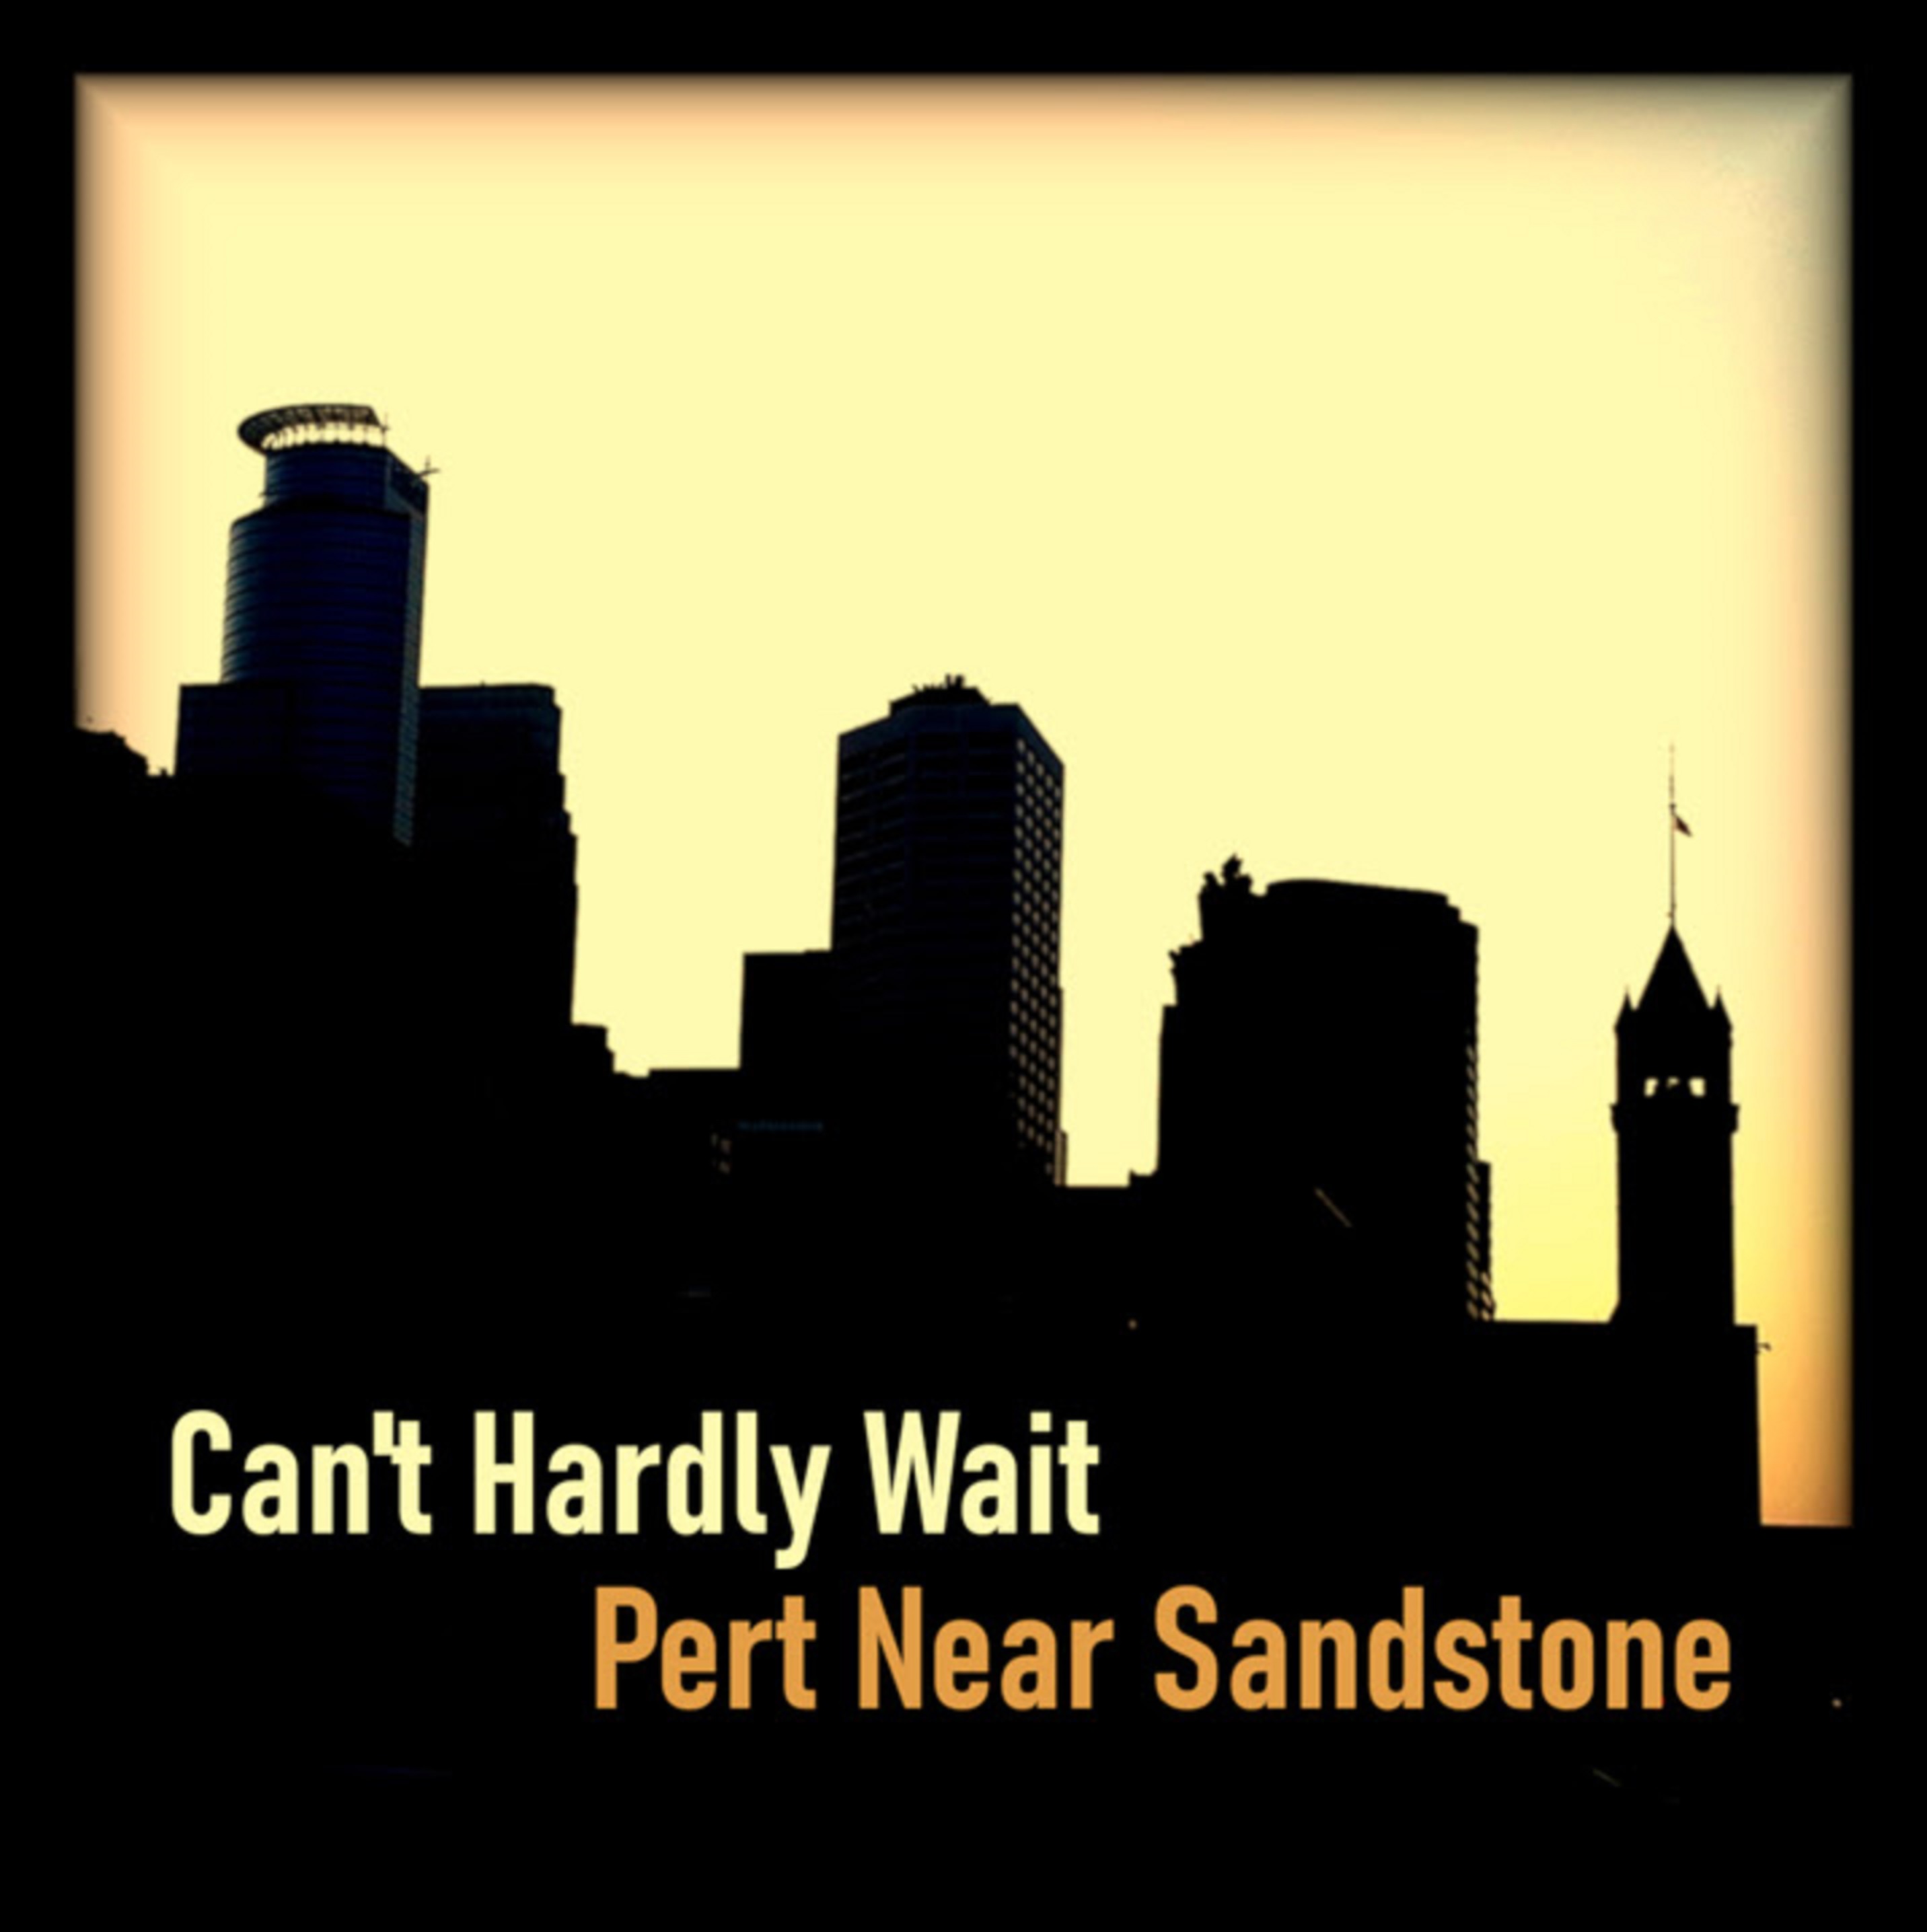 Pert Near Sandstone Covers The Replacements’ “Can’t Hardly Wait” - New Video + Single Out Now